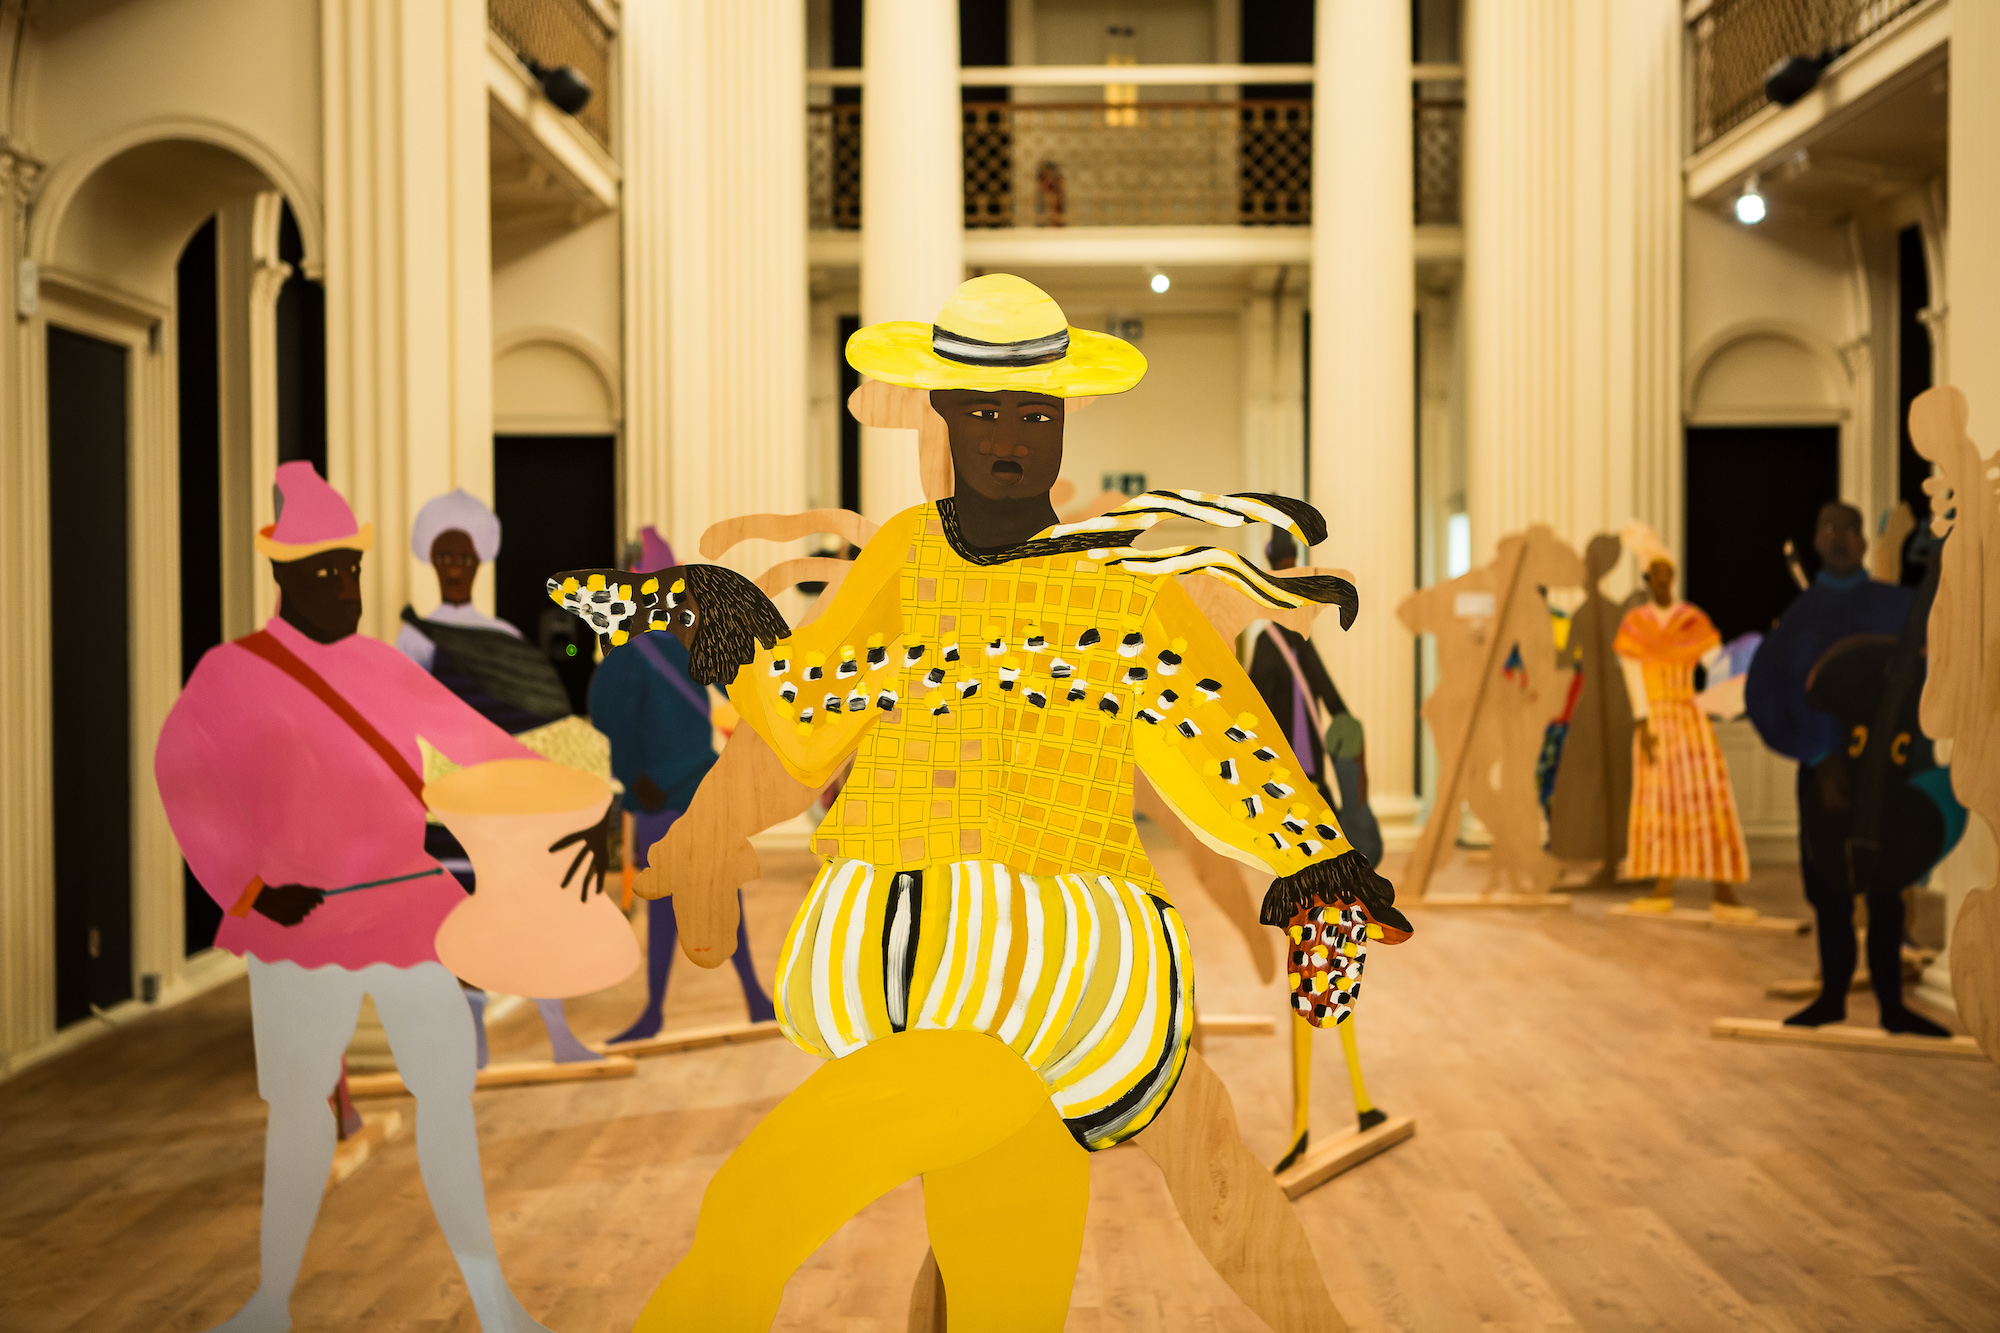 Lubaina Himid, Naming the Money, 2004, hand-painted wooden figures, close-up installation view The Accursed Share, 2023. Photo: Sally Jubb. Courtesy of Talbot Rice Gallery, University of Edinburgh